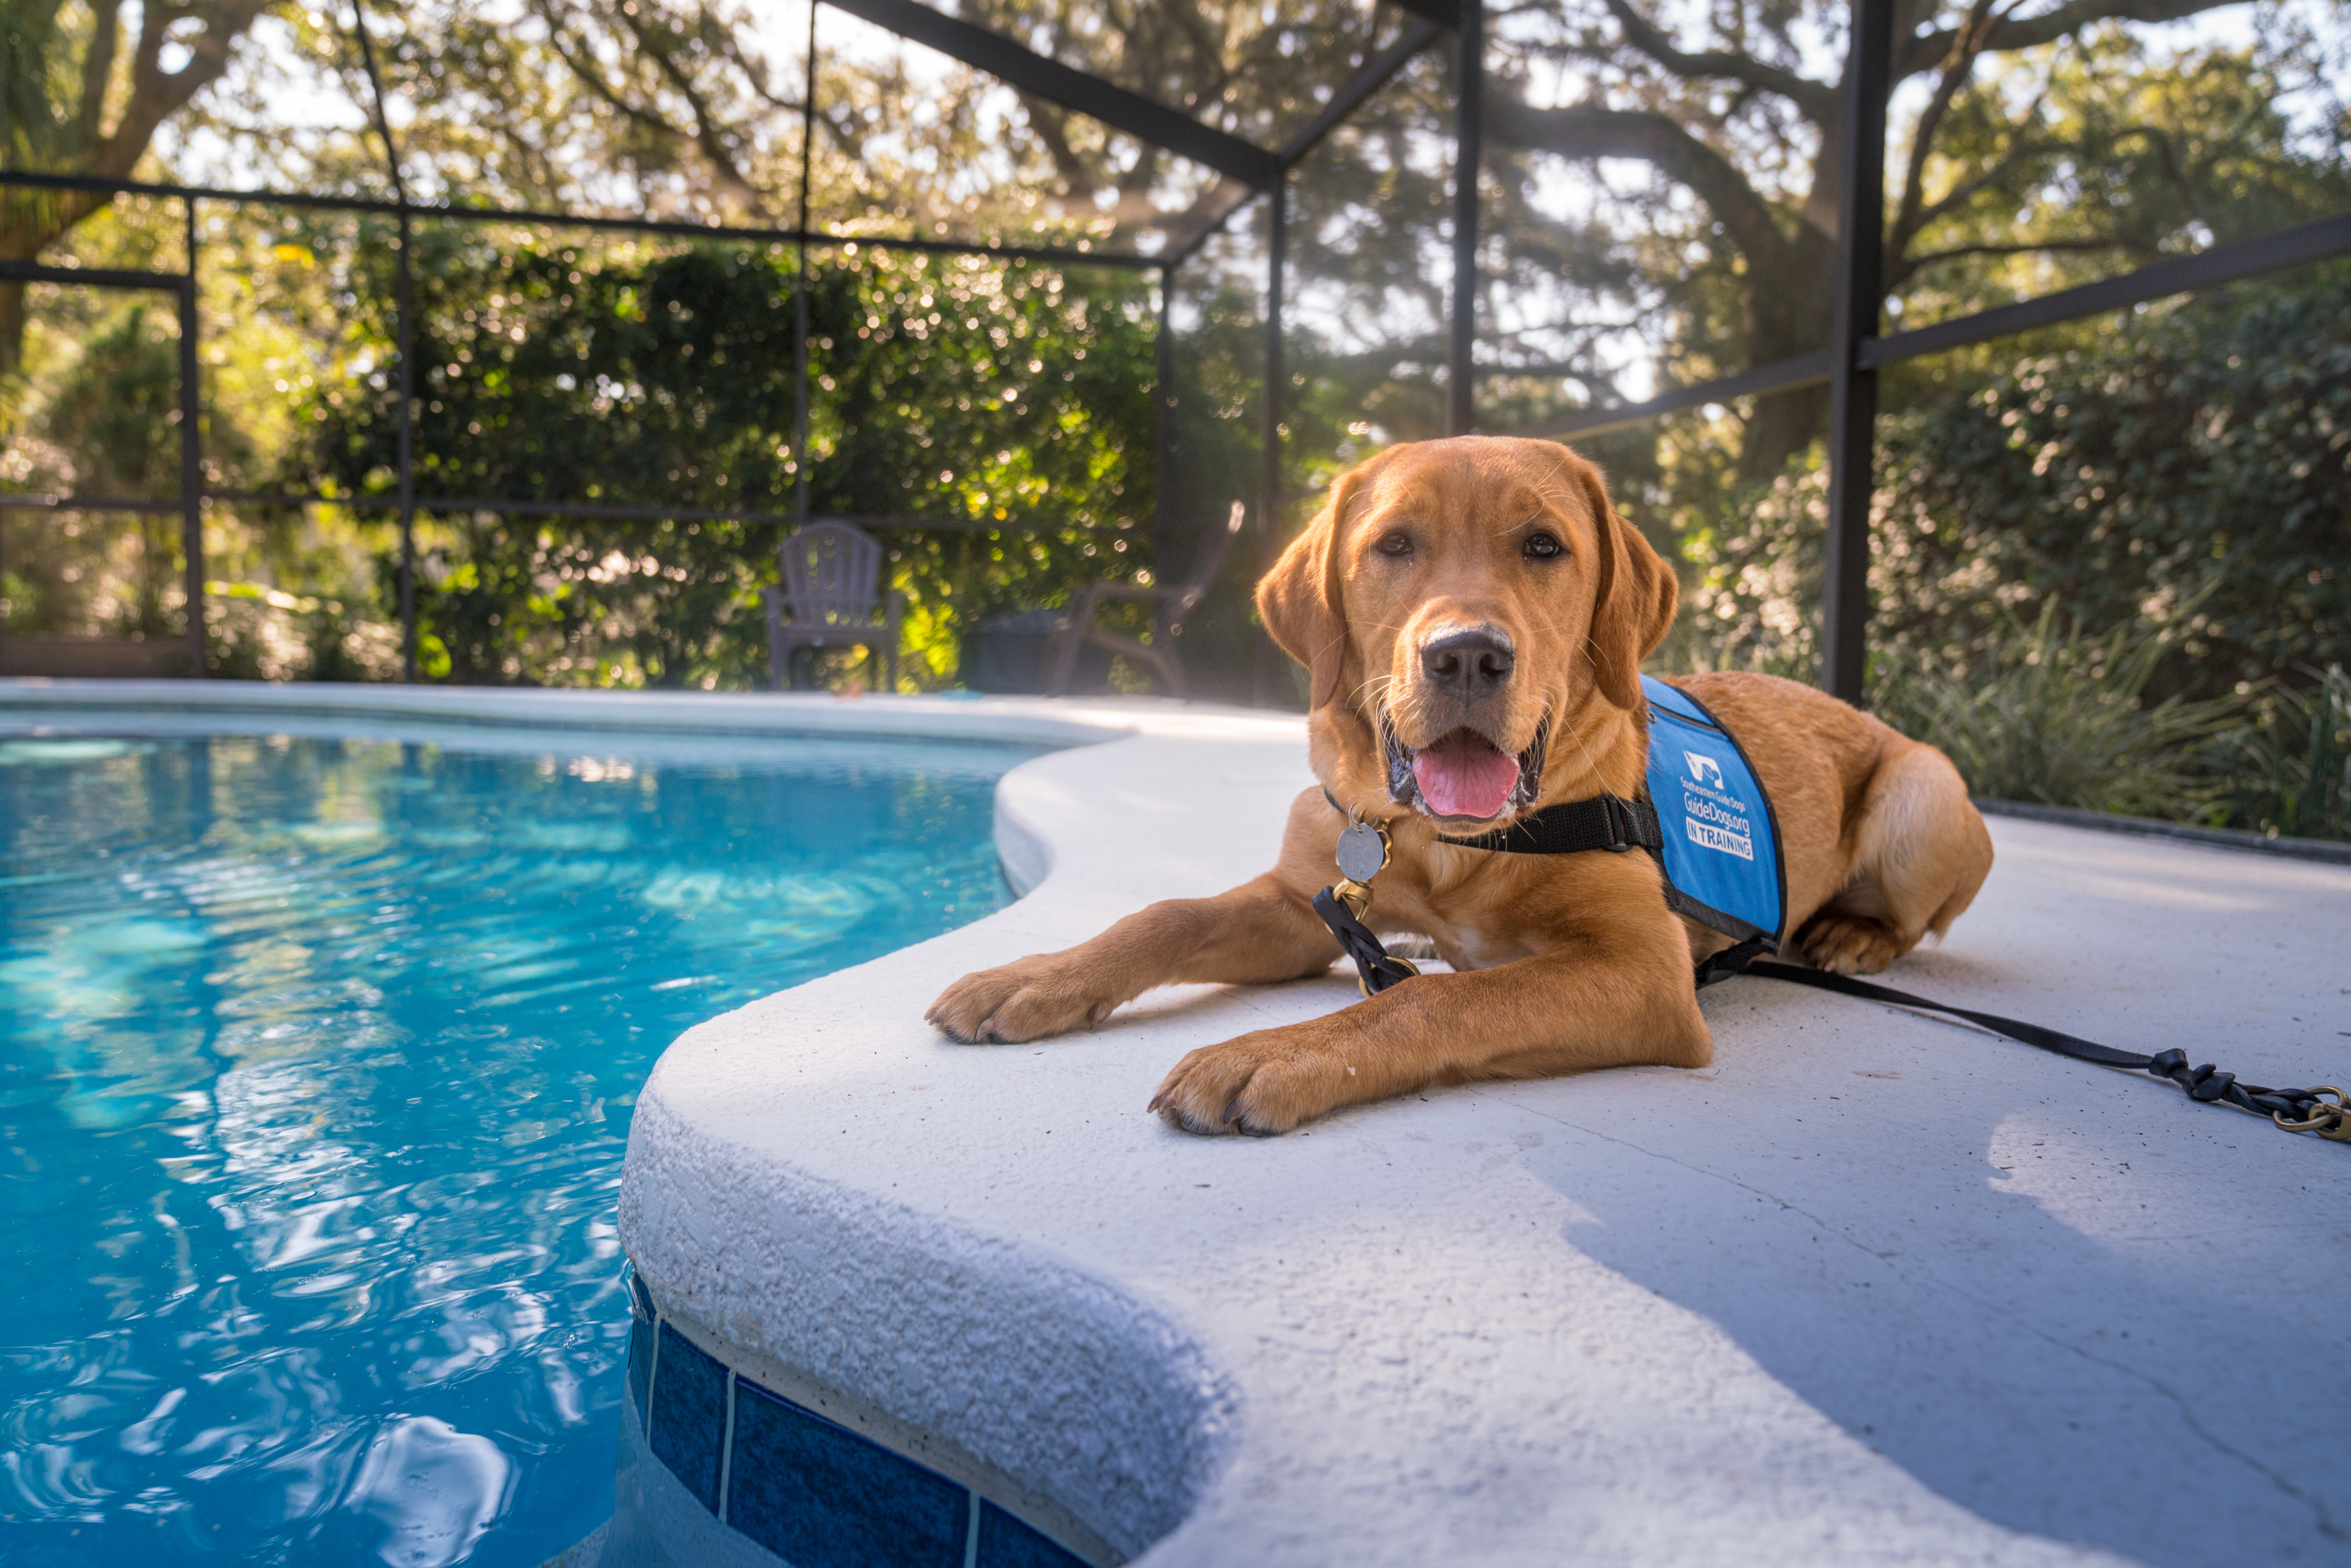 A yellow Labrador laying outside next to a pool.